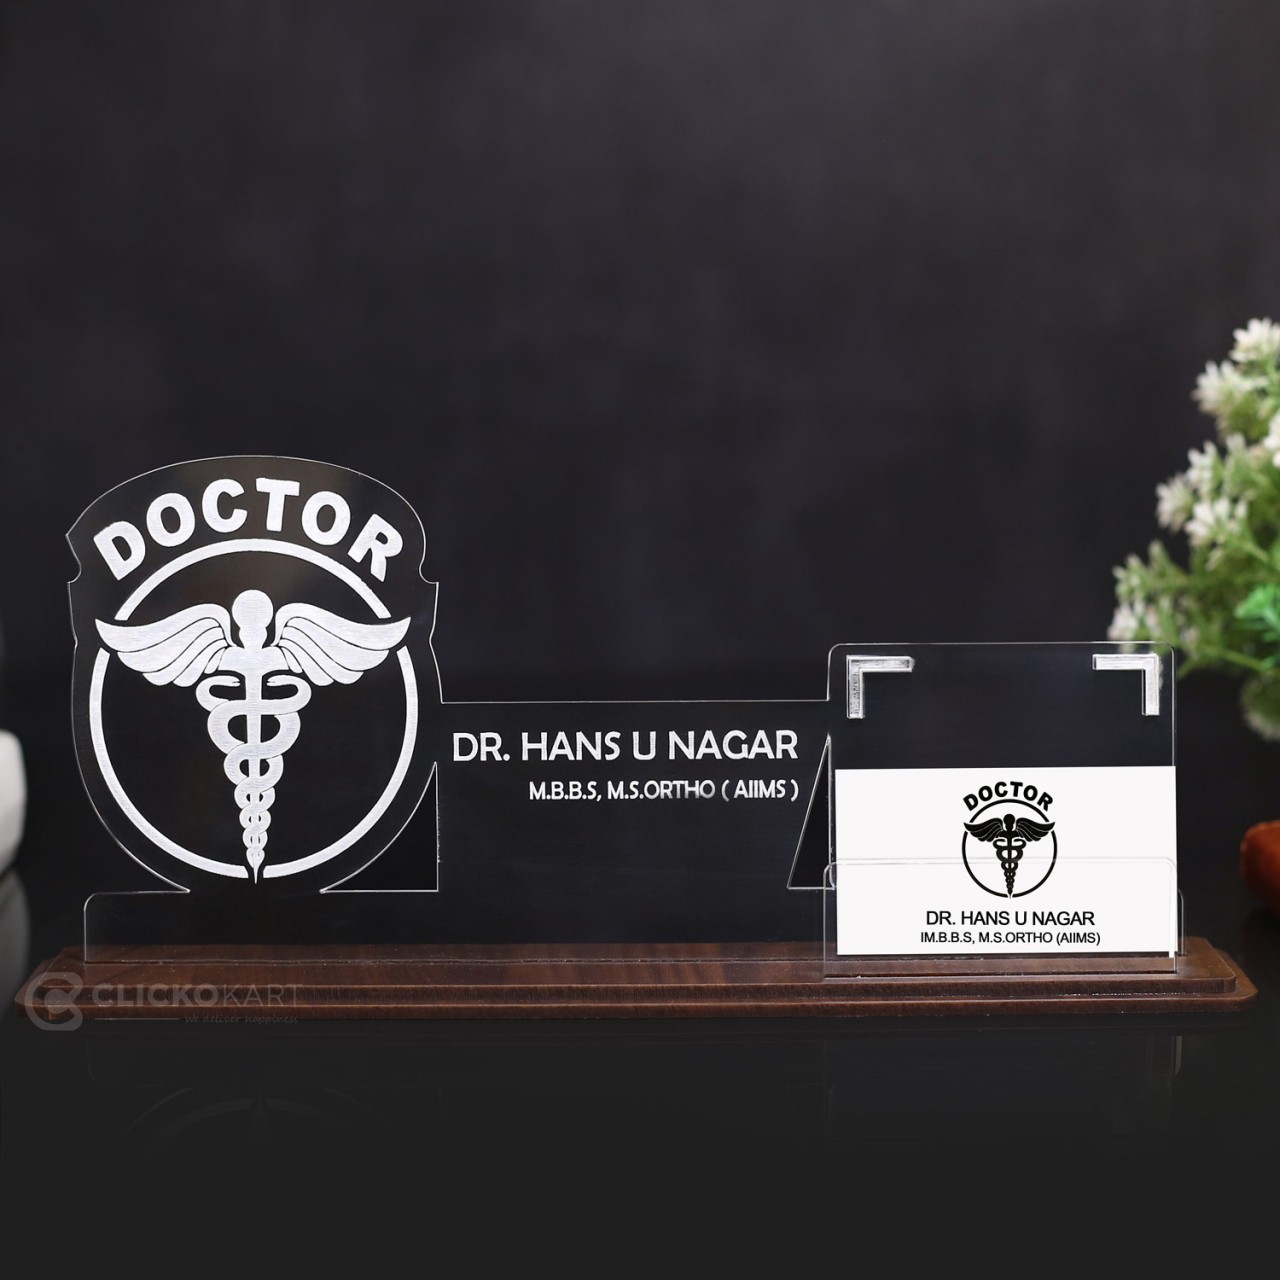 Personalized Acrylic Desk Name Plate For Doctors